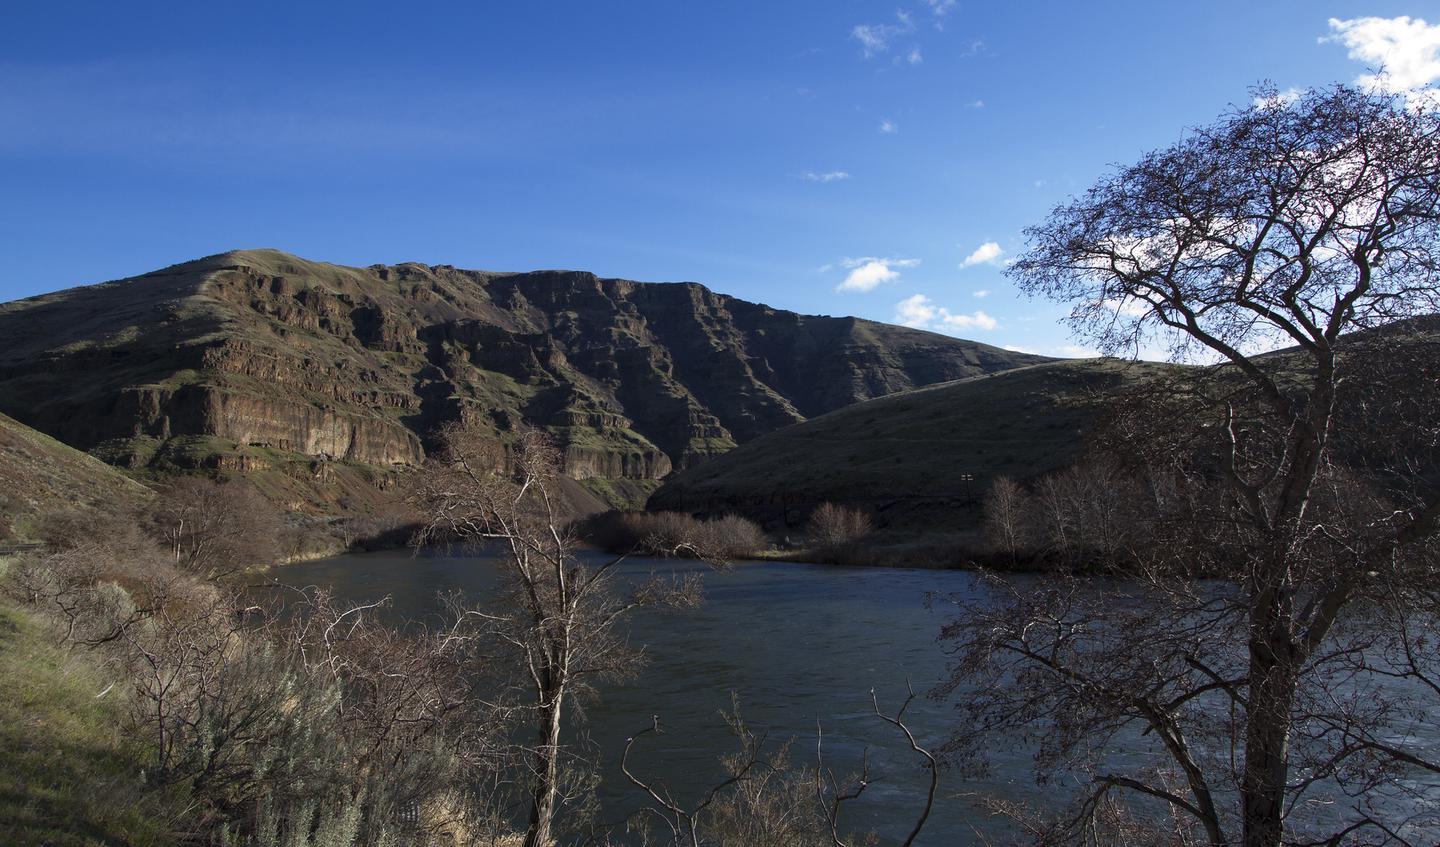 Late afternoon view of the Deschutes River canyon and of the mouth of Rattlesnake Canyon at Rattlesnake Canyon Campground